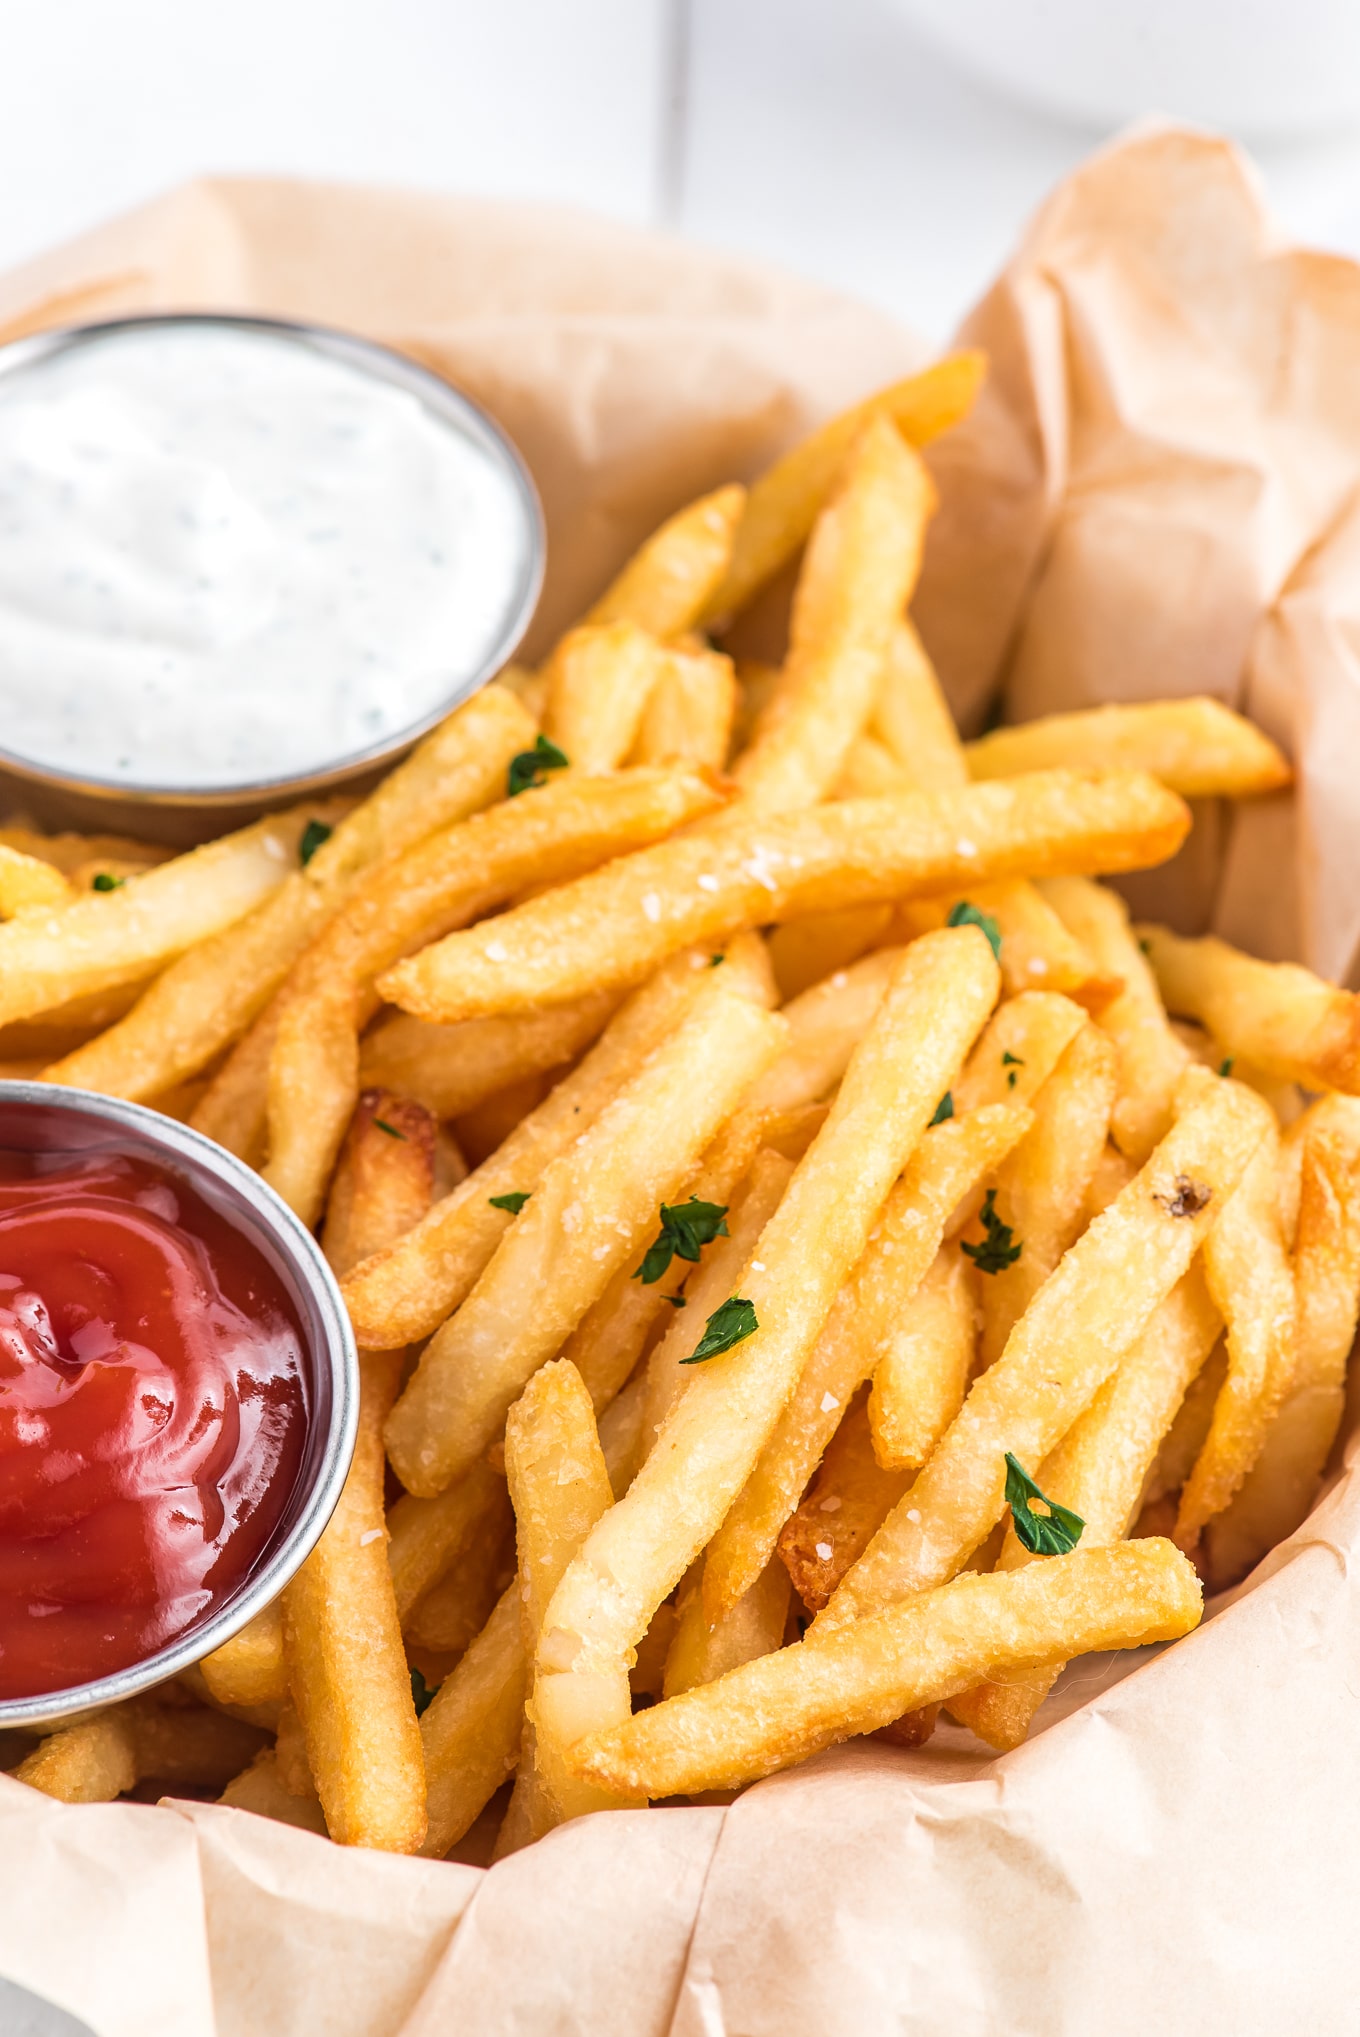 basket of air fryer fries with ketchup and ranch dressing./Enjoy crispy and delicious frozen French fries in minutes with this easy air fryer recipe. Get that classic crispy texture and savory flavor you love, with the convenience of the air fryer.